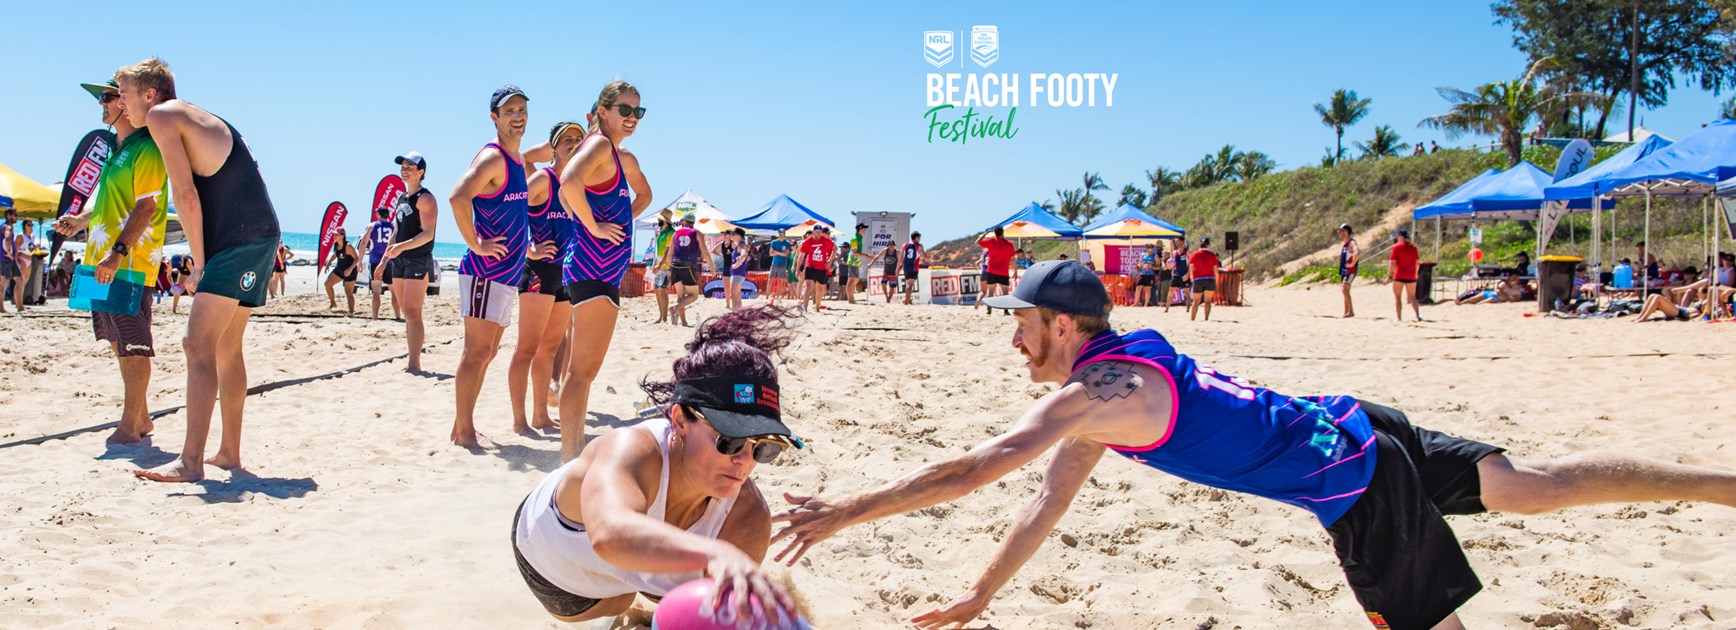 Touch football is coming to Bondi Beach!